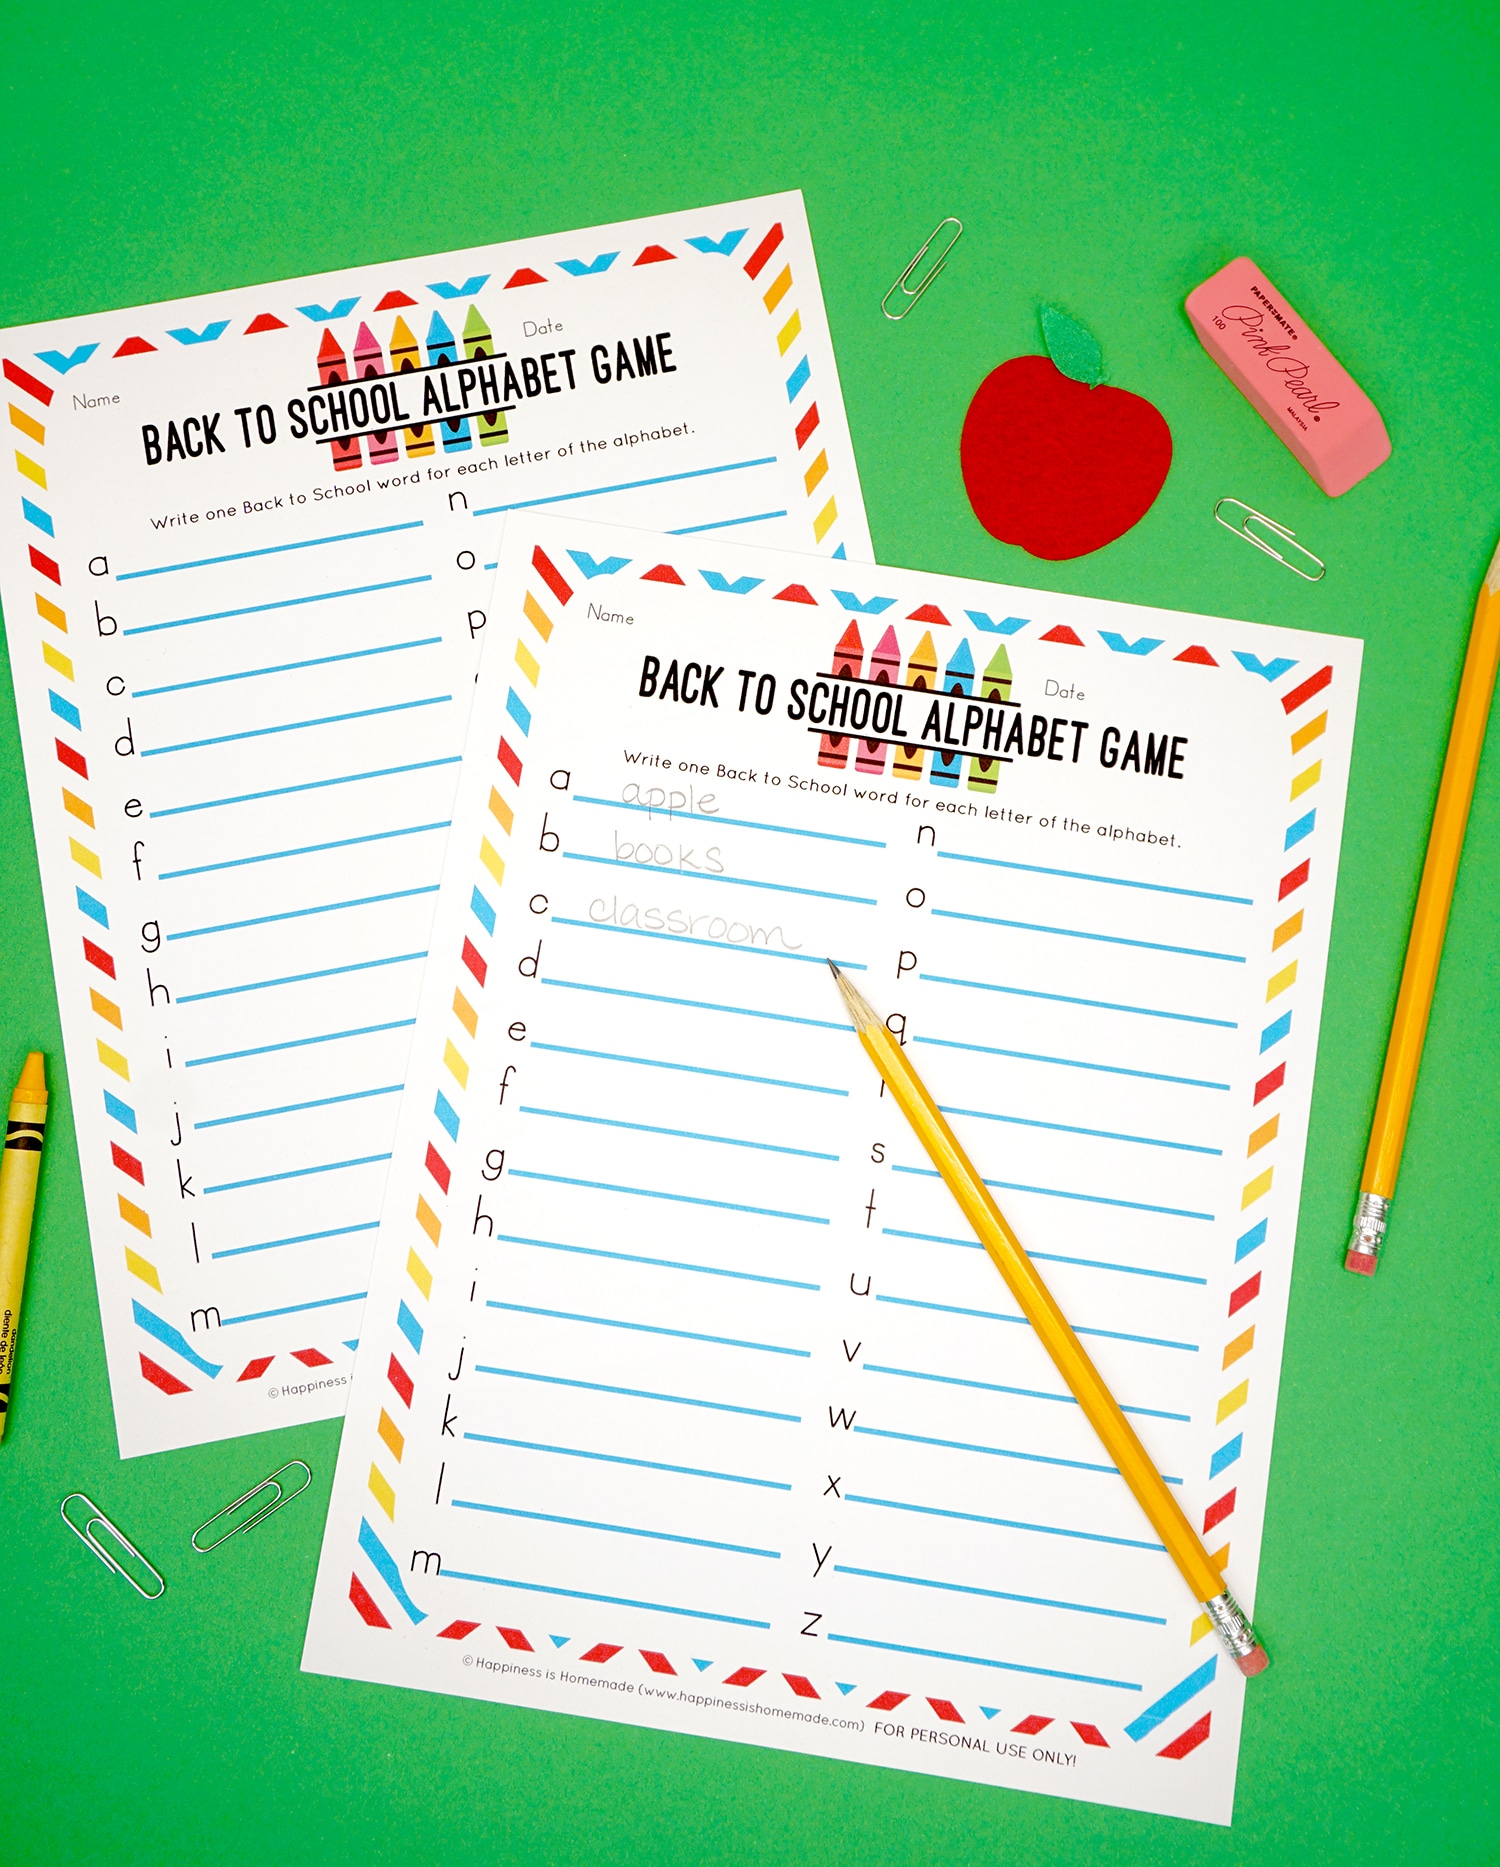 Back to School Alphabet Game Printable - Happiness is Homemade